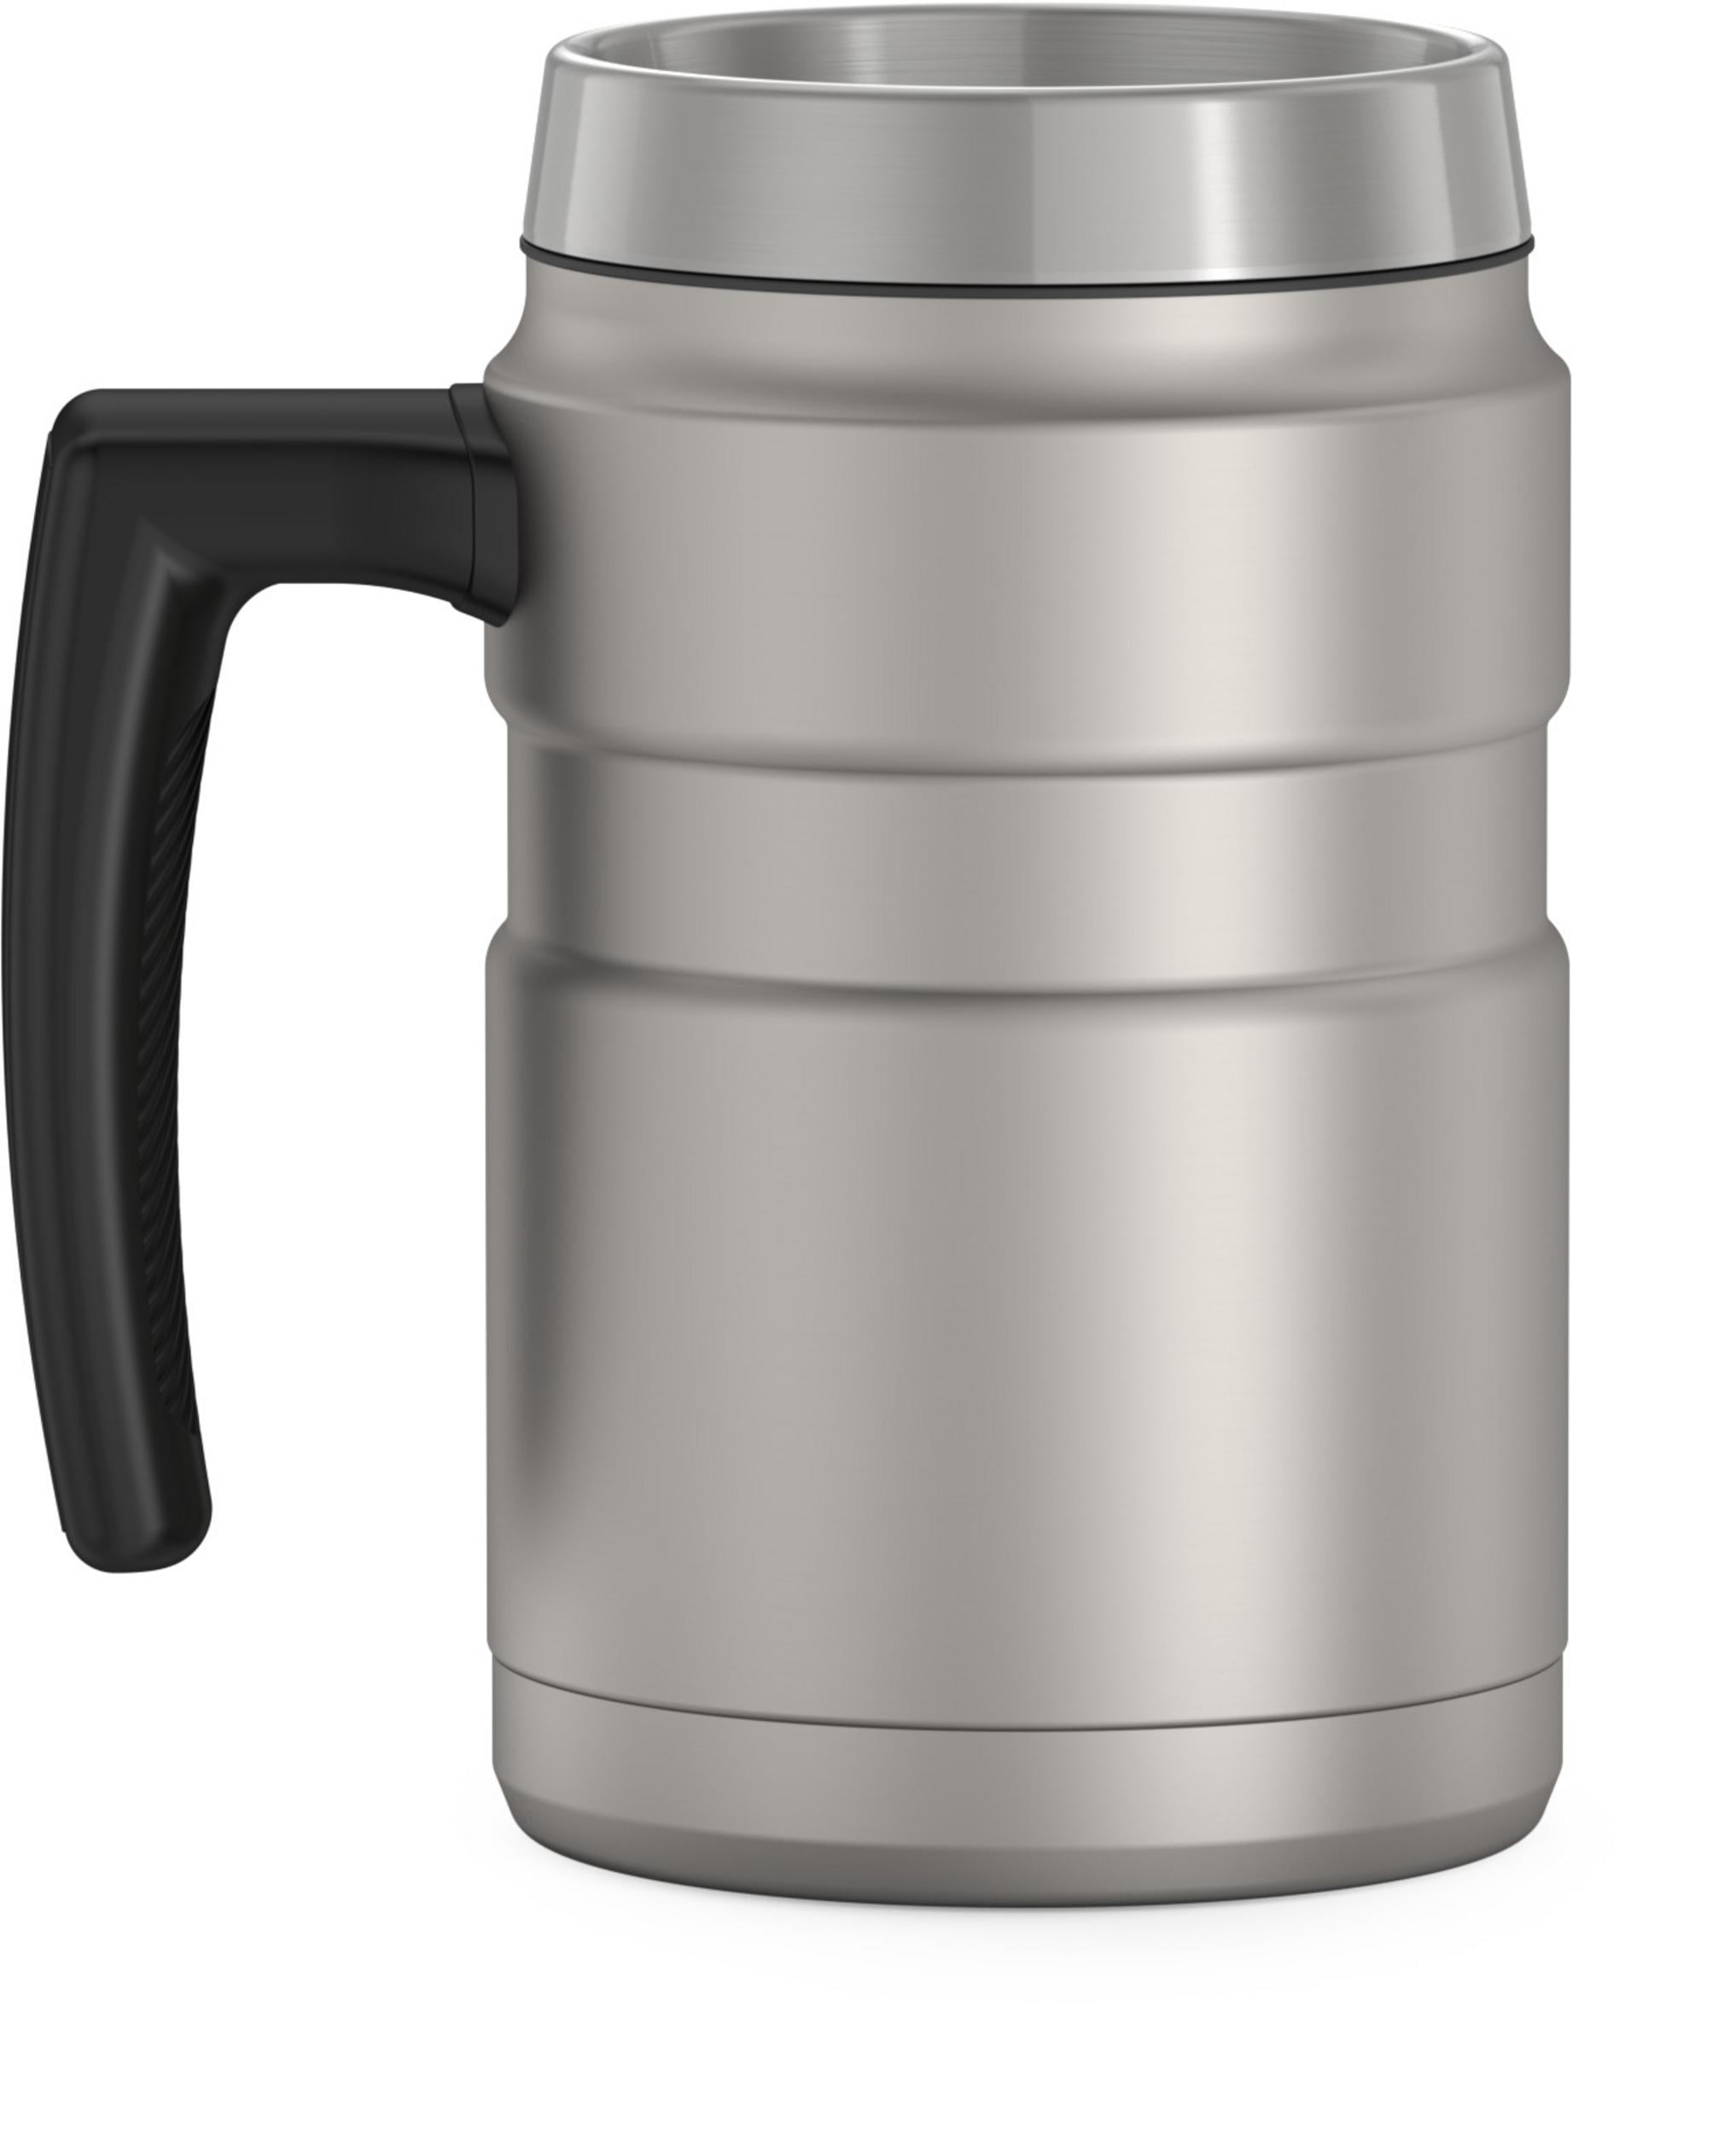  Novelty Inc. 16 oz. Stainless Steel Thermal Printed Travel  Coffee Mug with Lid and Handle - Get it Done : Home & Kitchen